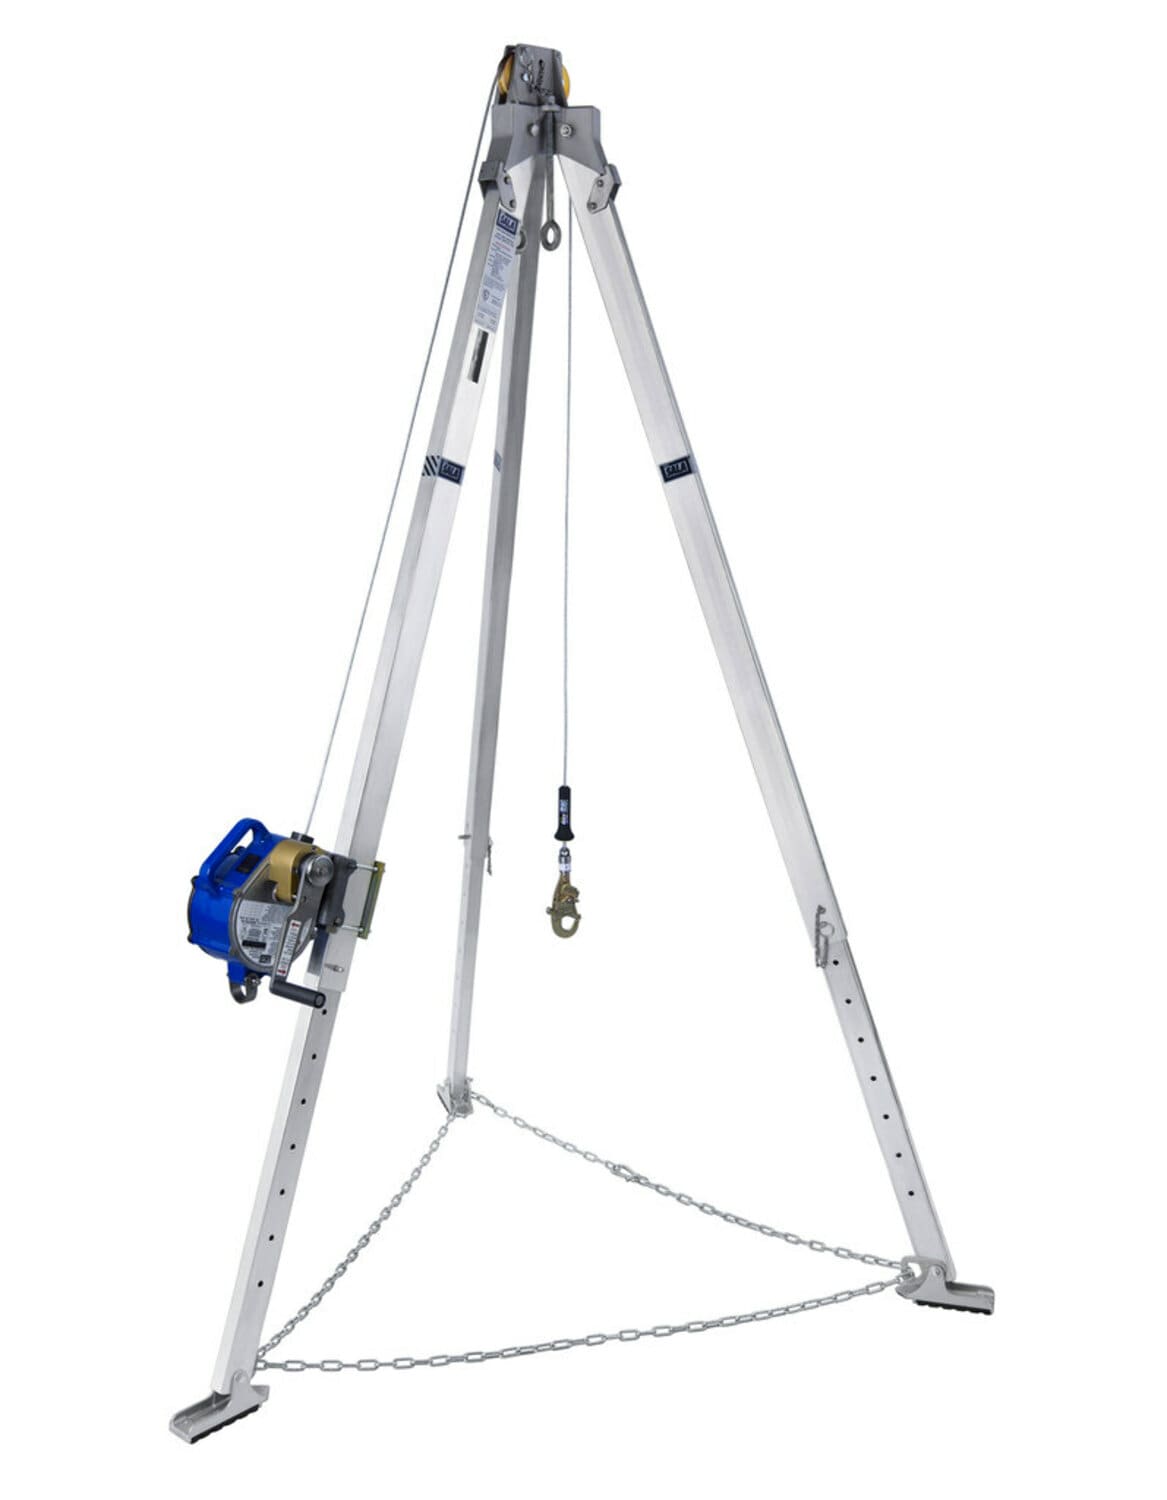 7012820476 - 3M DBI-SALA Confined Space Aluminum Tripod with 3-Way SRL 8301049, 9 ft High, 85 ft Galvanized Cable